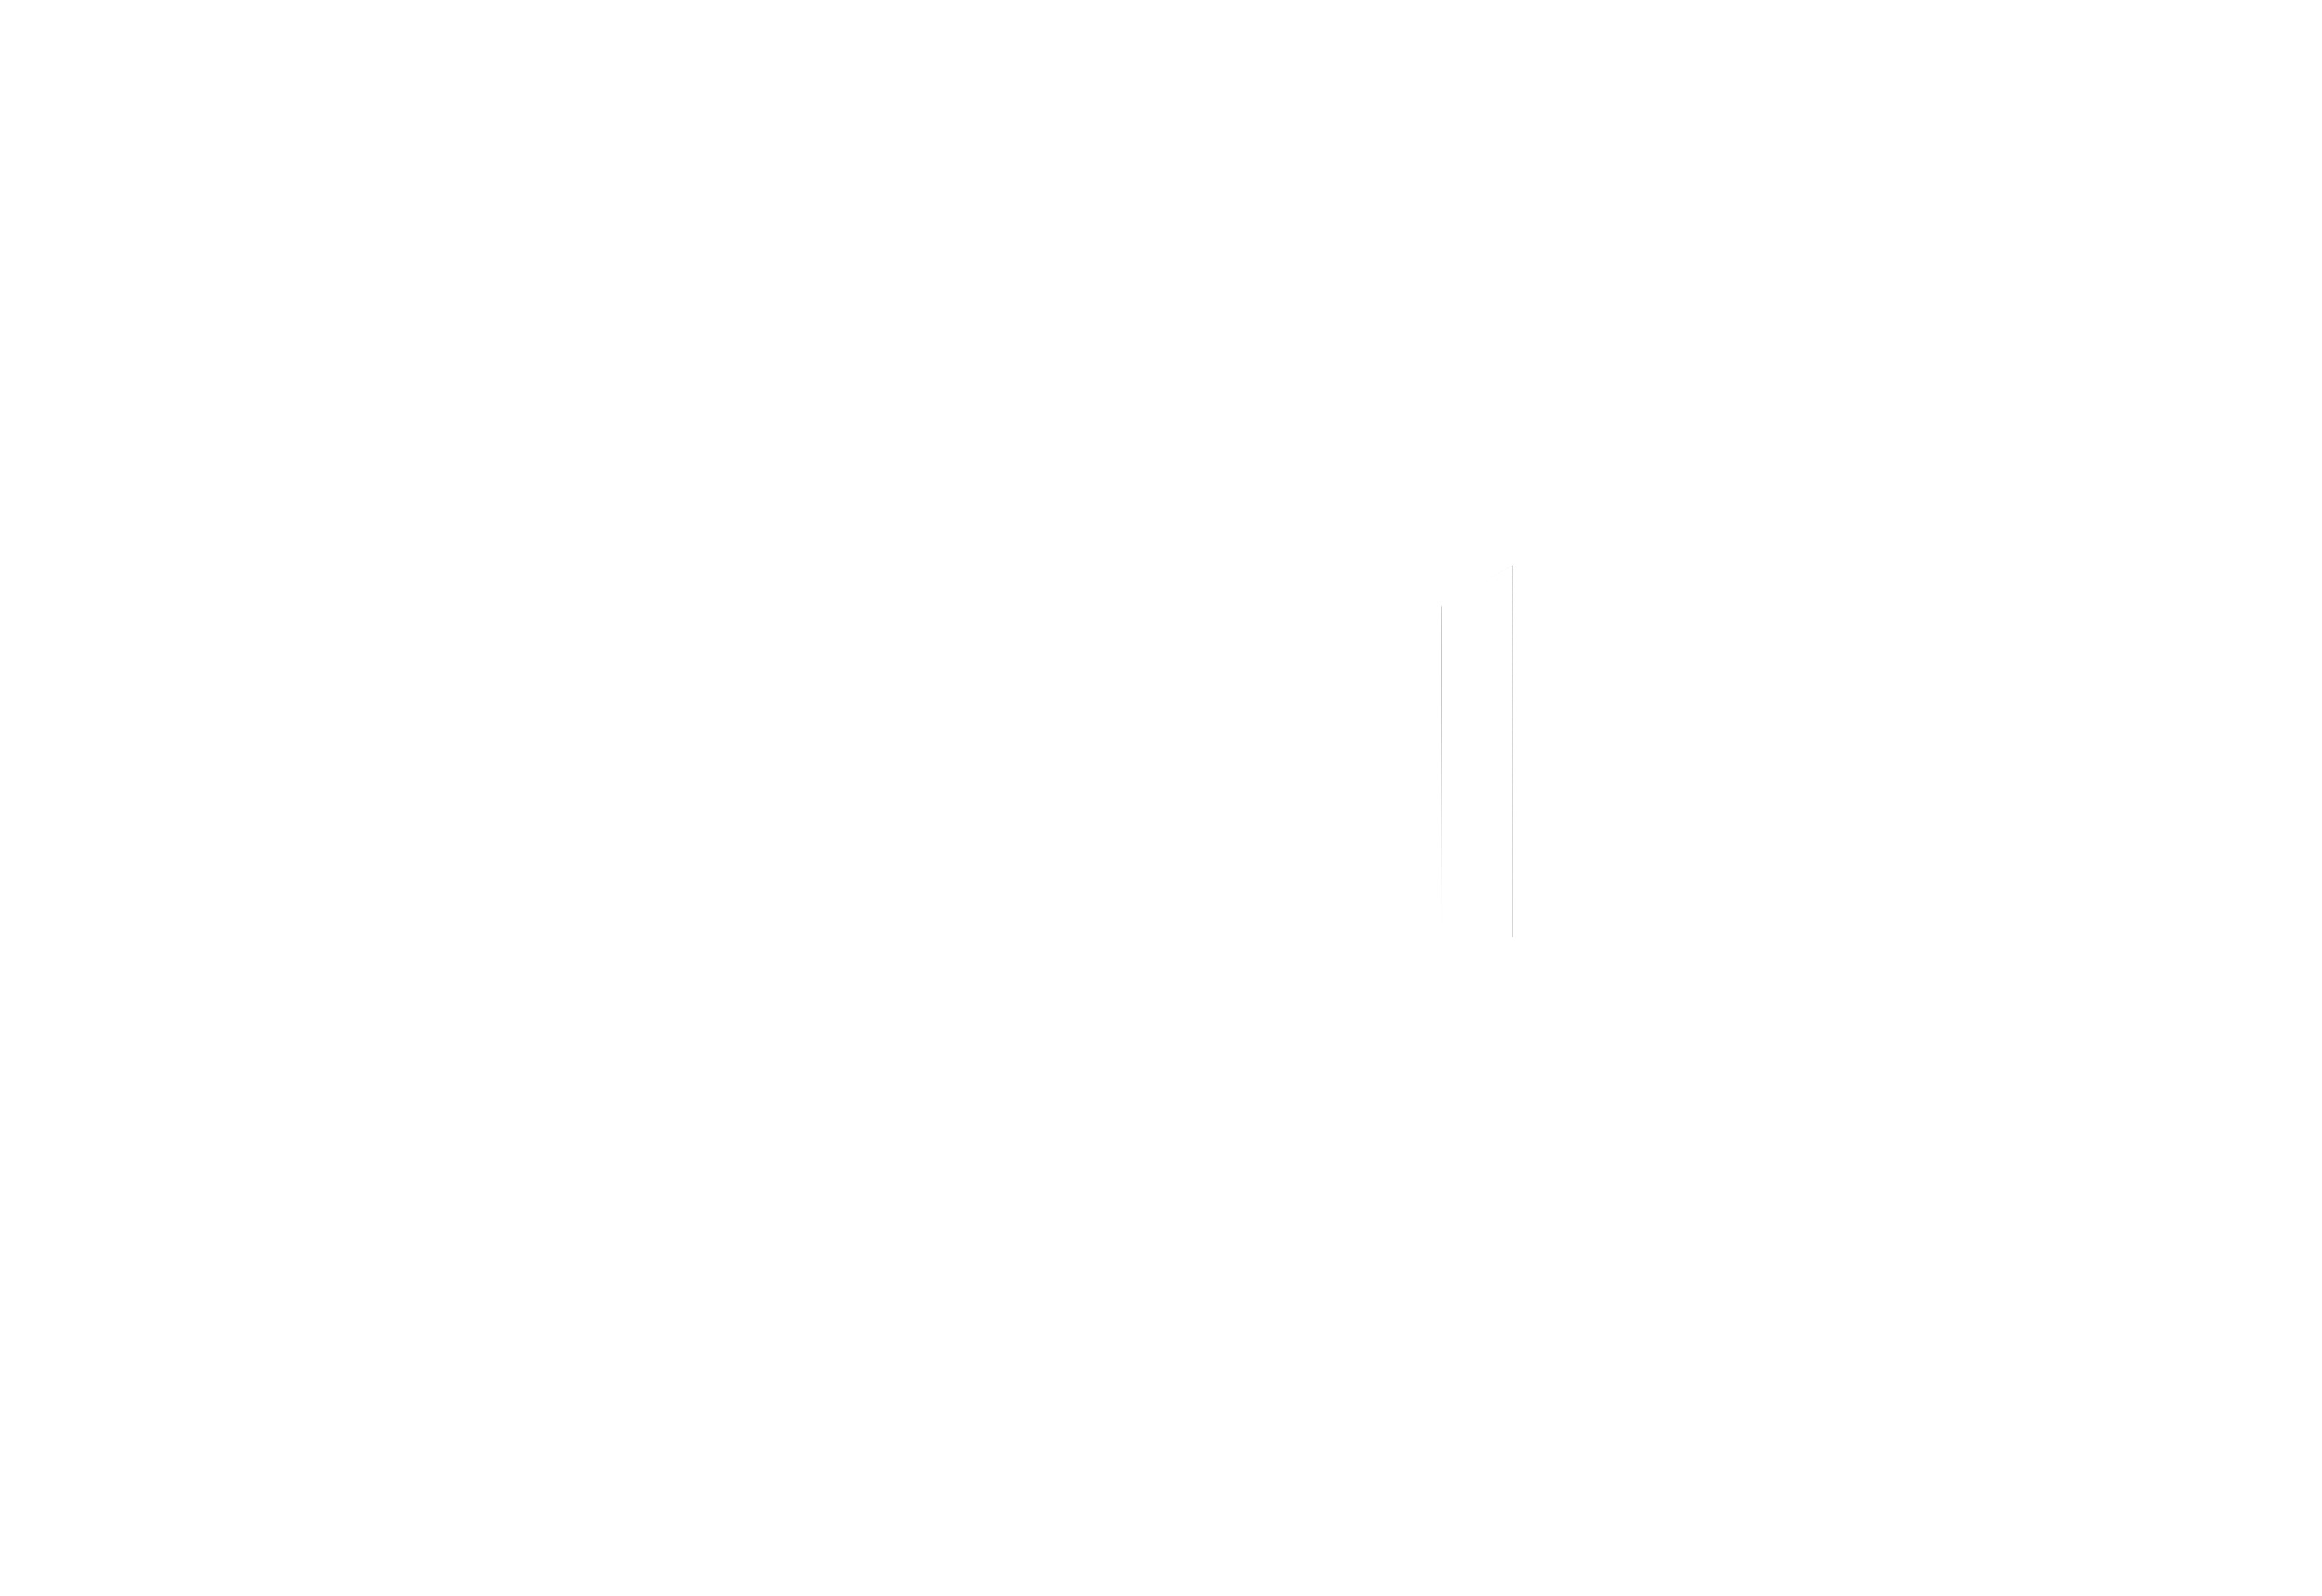 Cabinet Orion Immobilier Logo